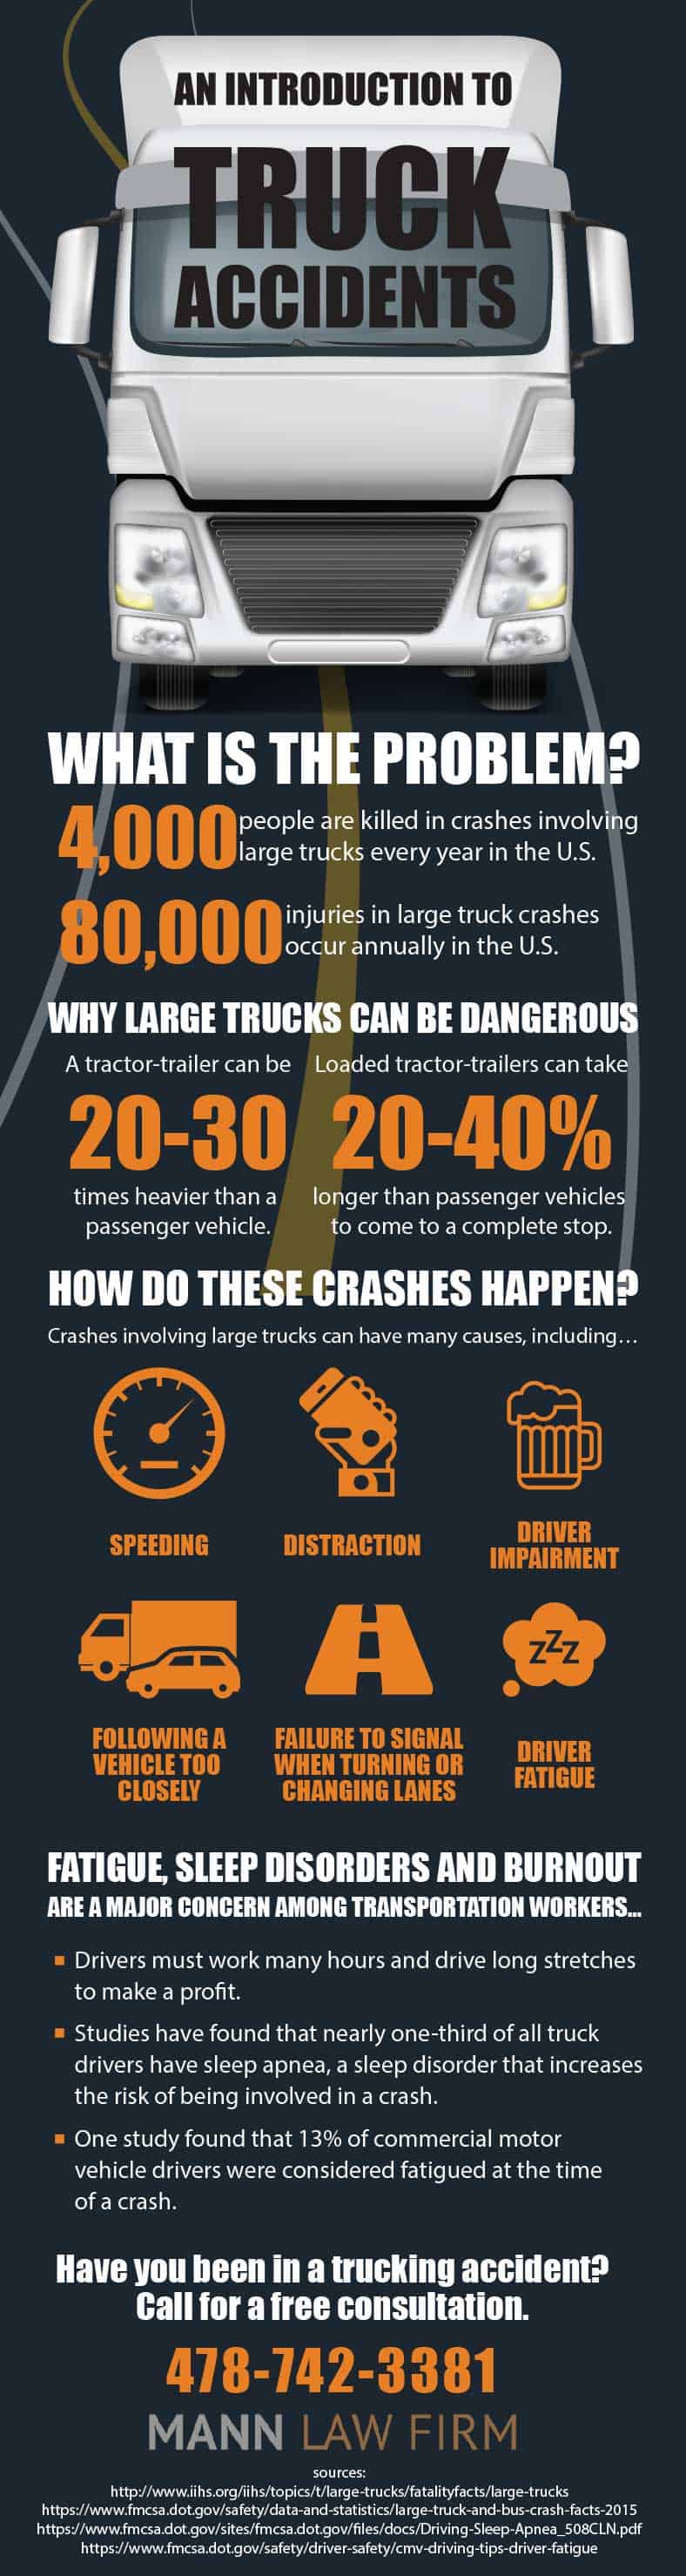 Mann Truck Accident Infographic